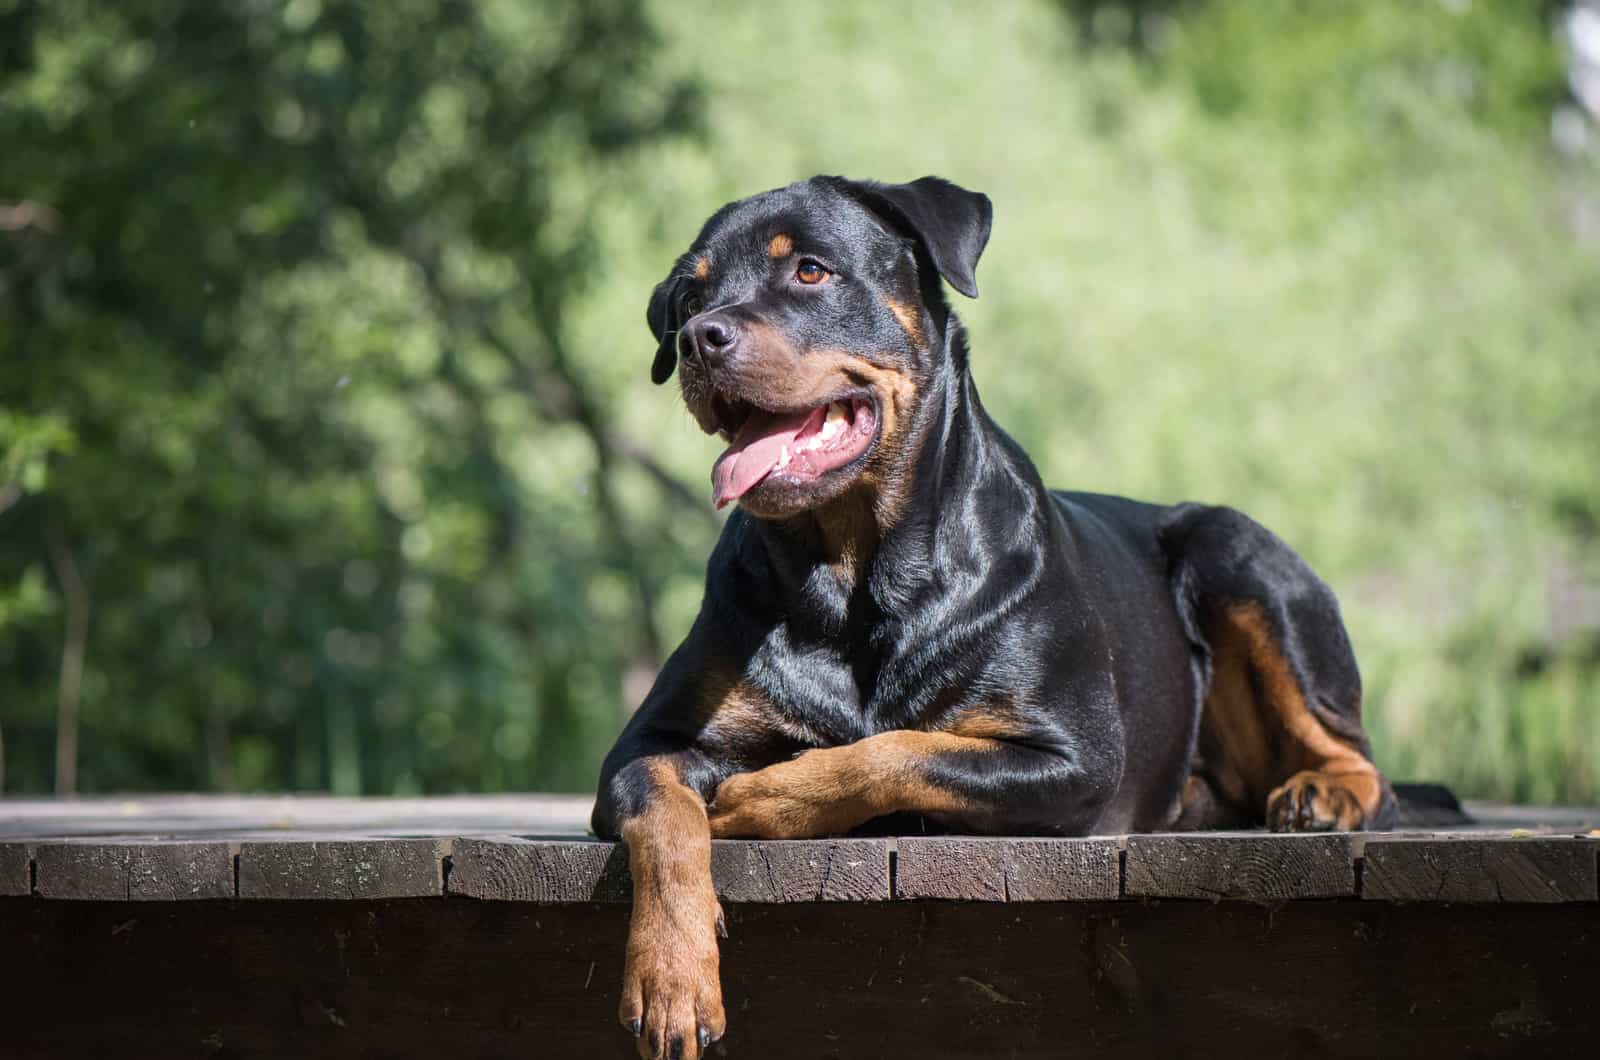 19 Best Dog Foods For Rottweilers + Nutritional Needs Guide